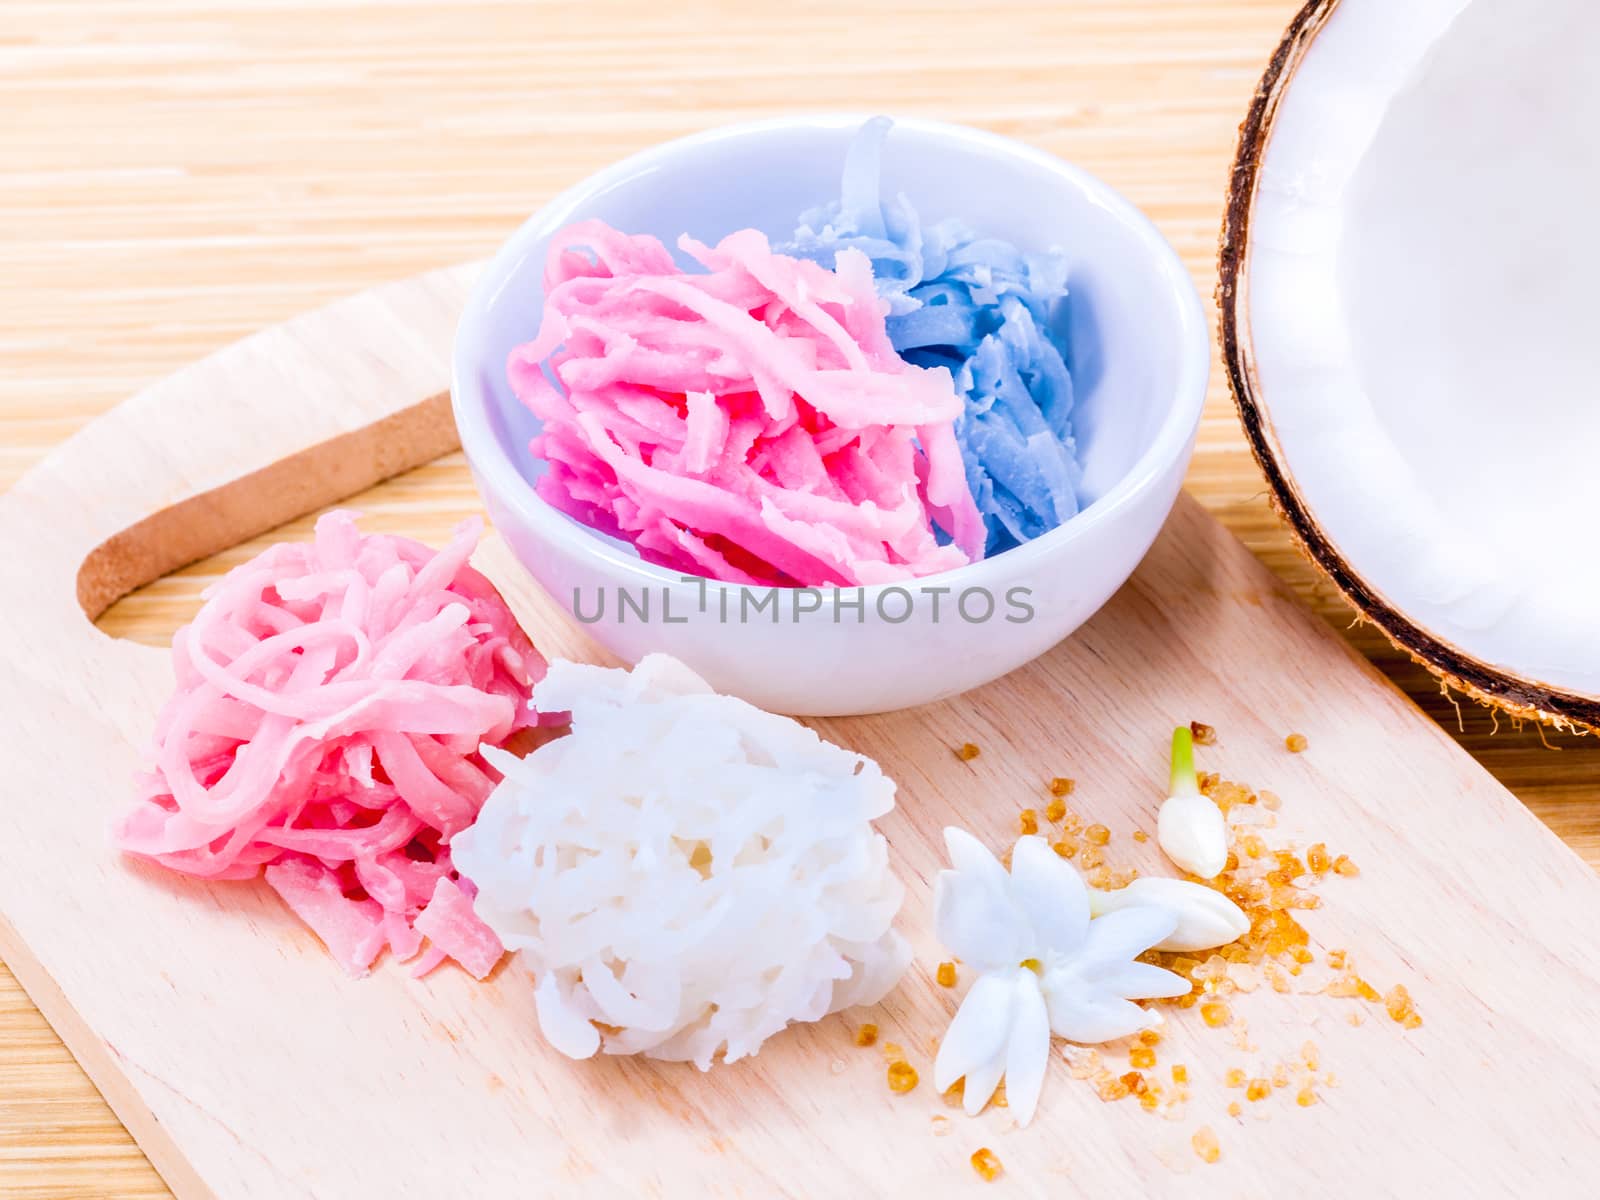 A colorful traditional coconut dessert made from grated coconut  by kerdkanno